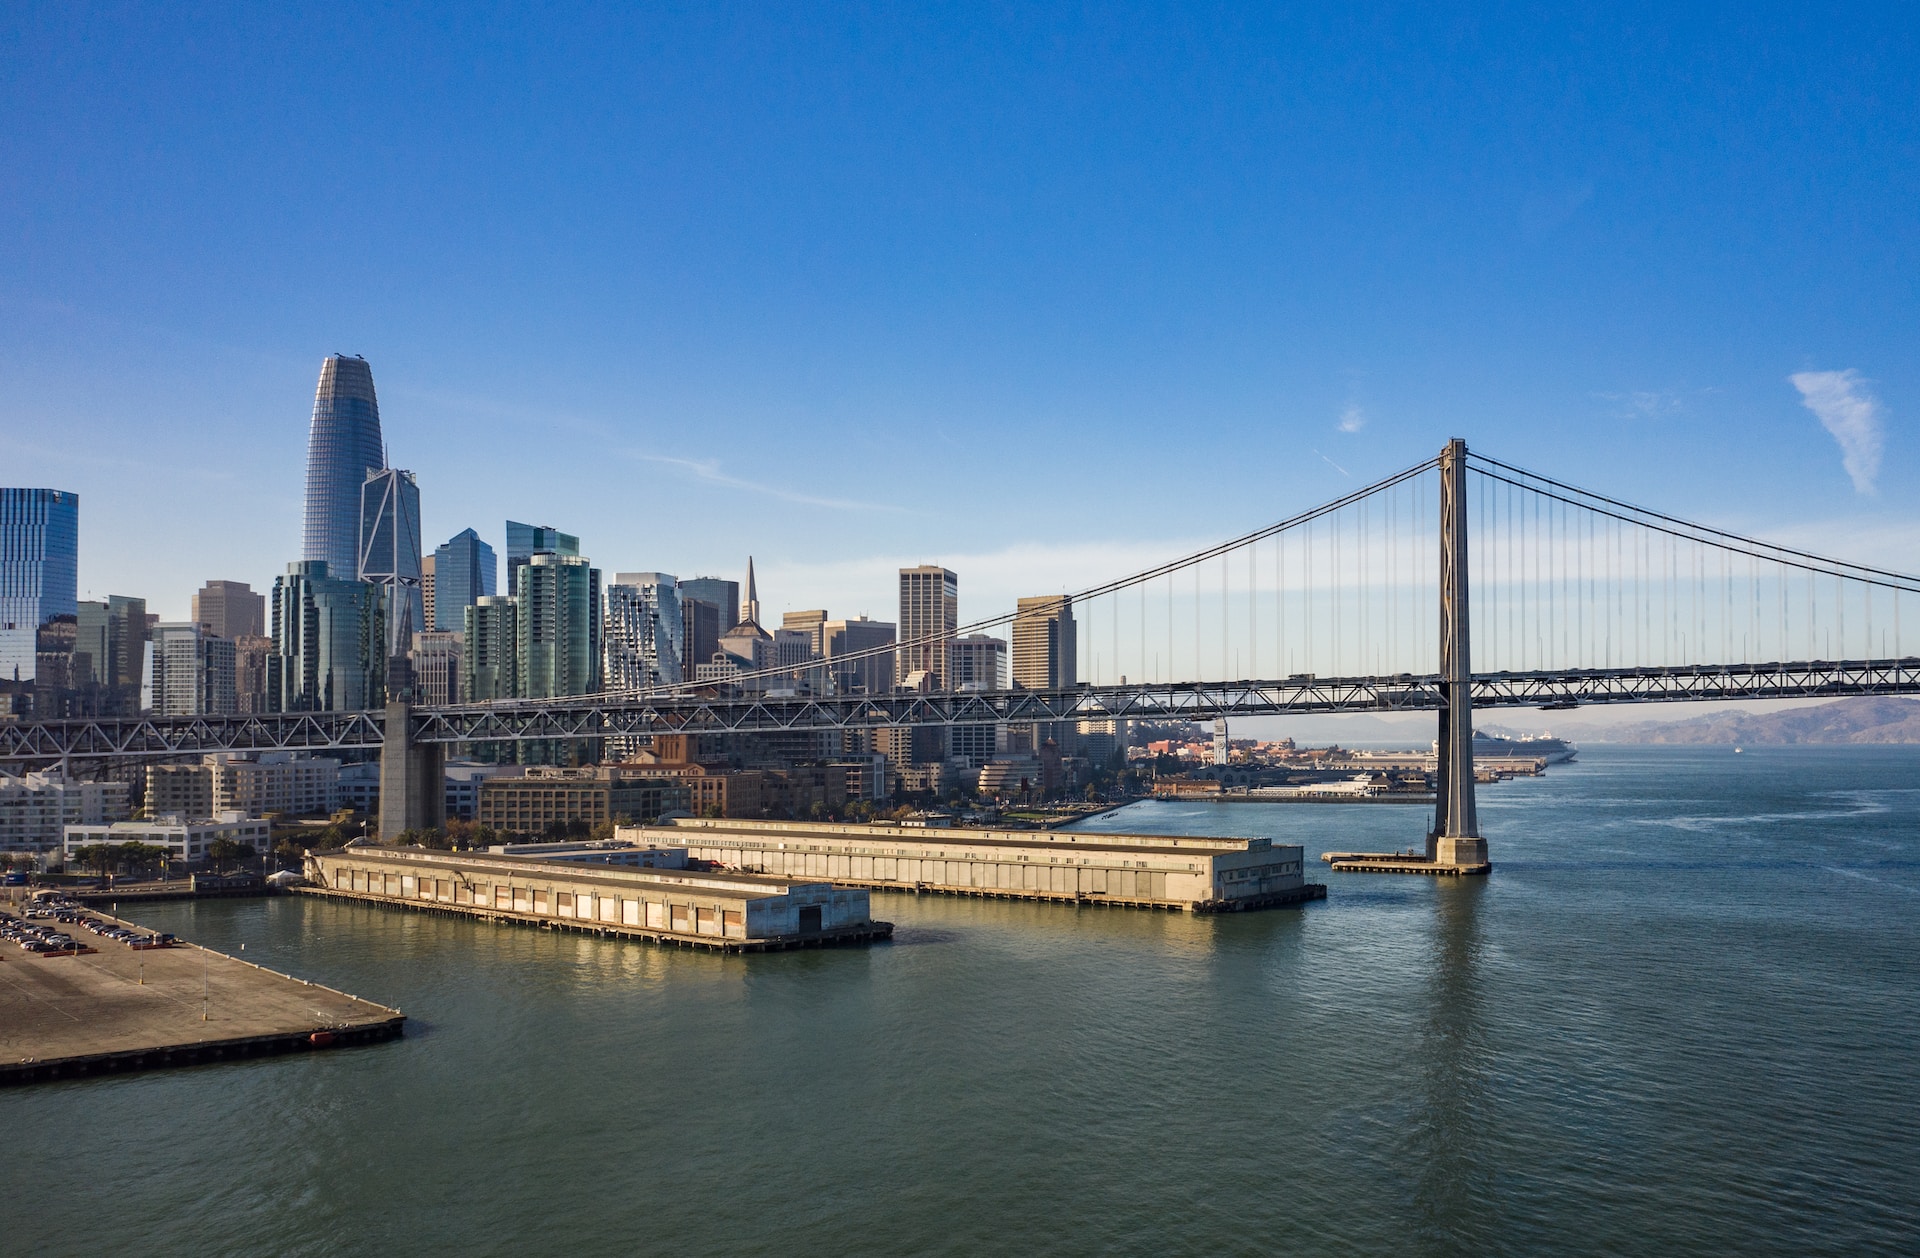 Tourism is one of the largest sectors for job creation for San Francisco.